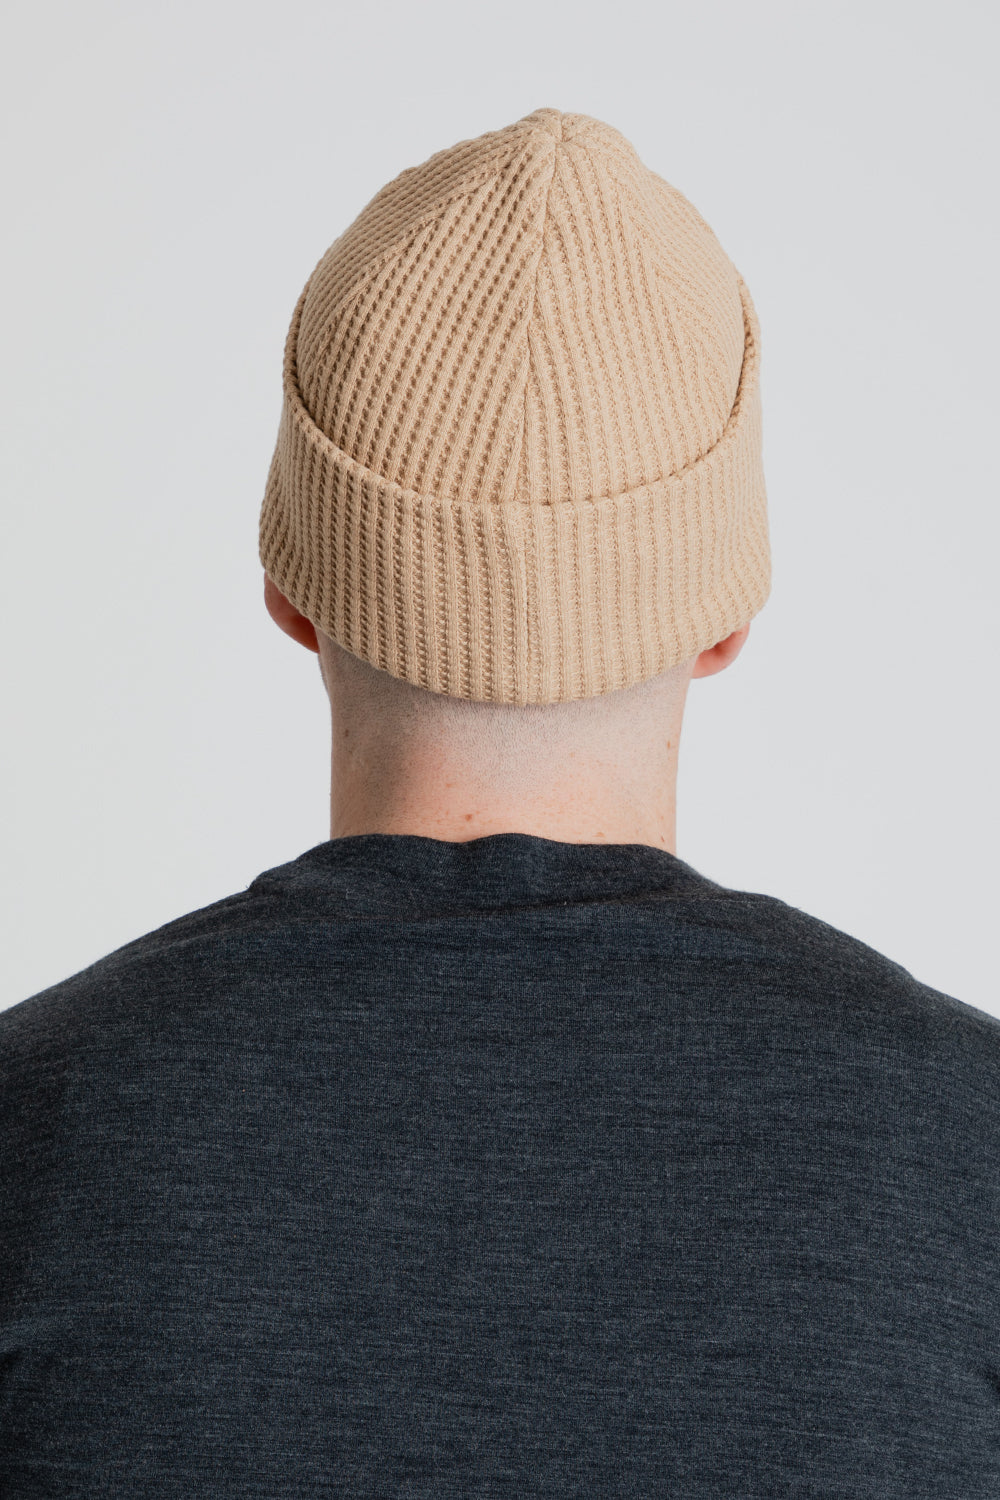 Jackman Waffle Knit Cap in Bisquit